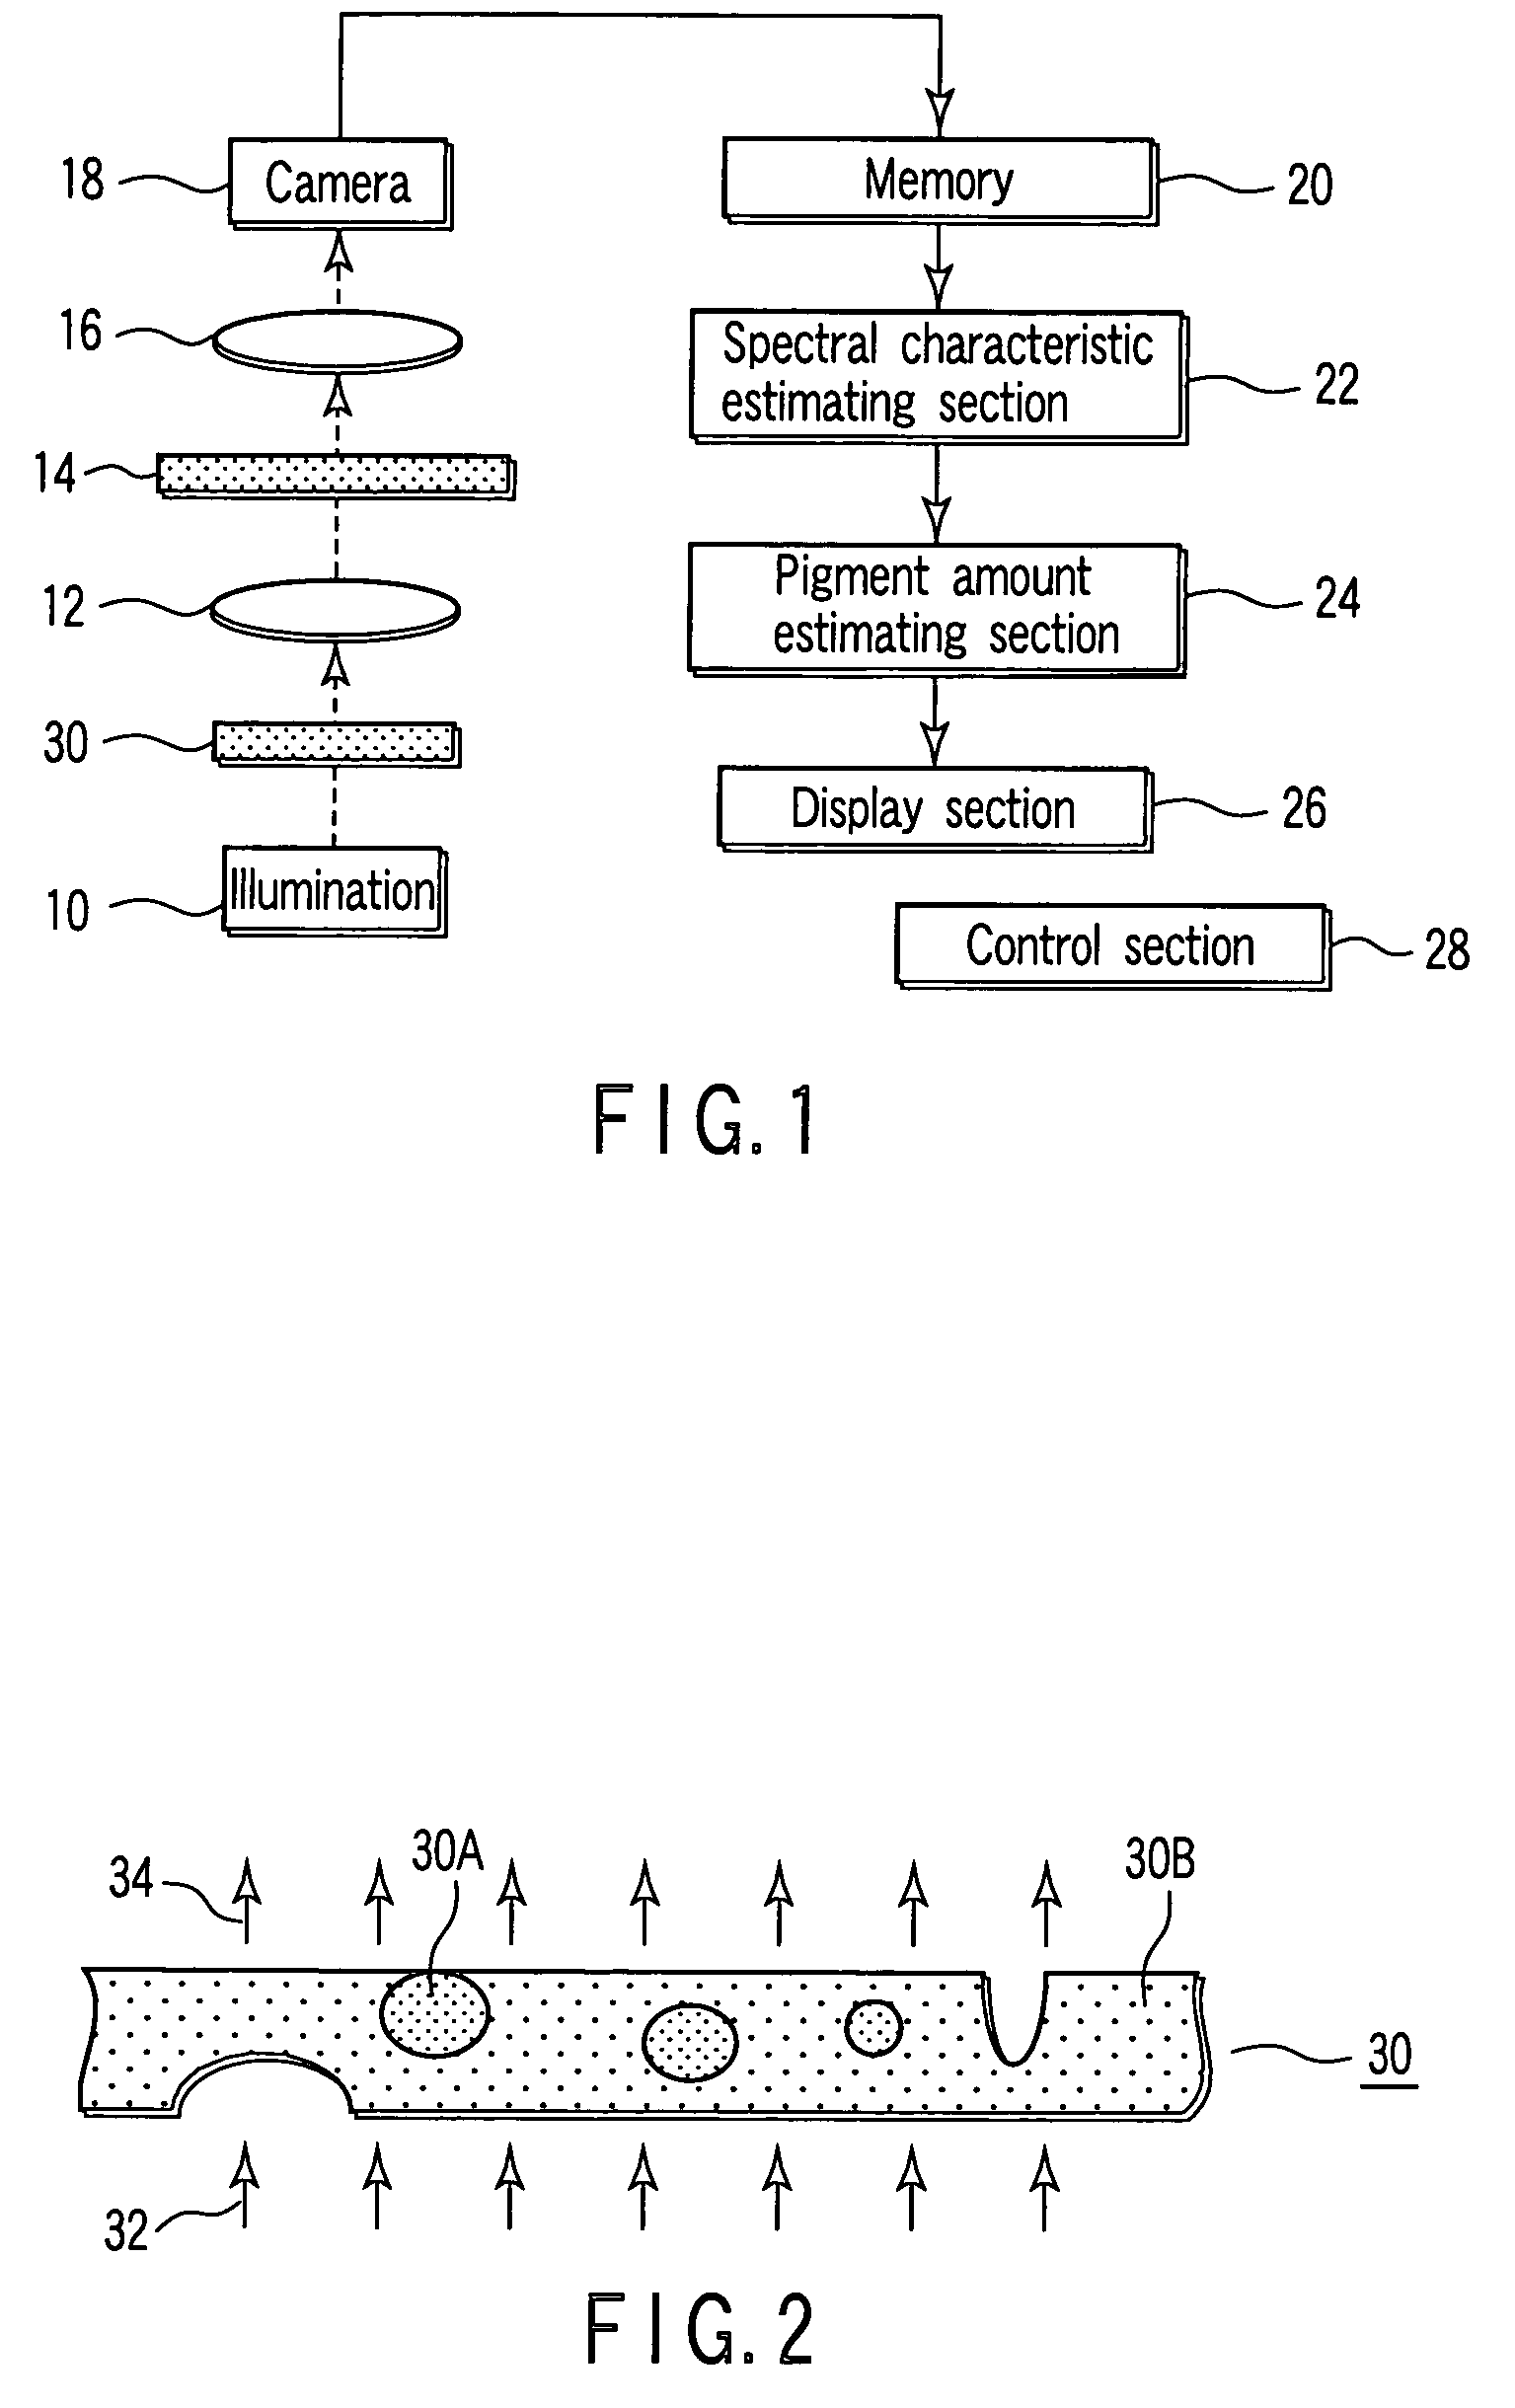 Image processing apparatus and method for processing images